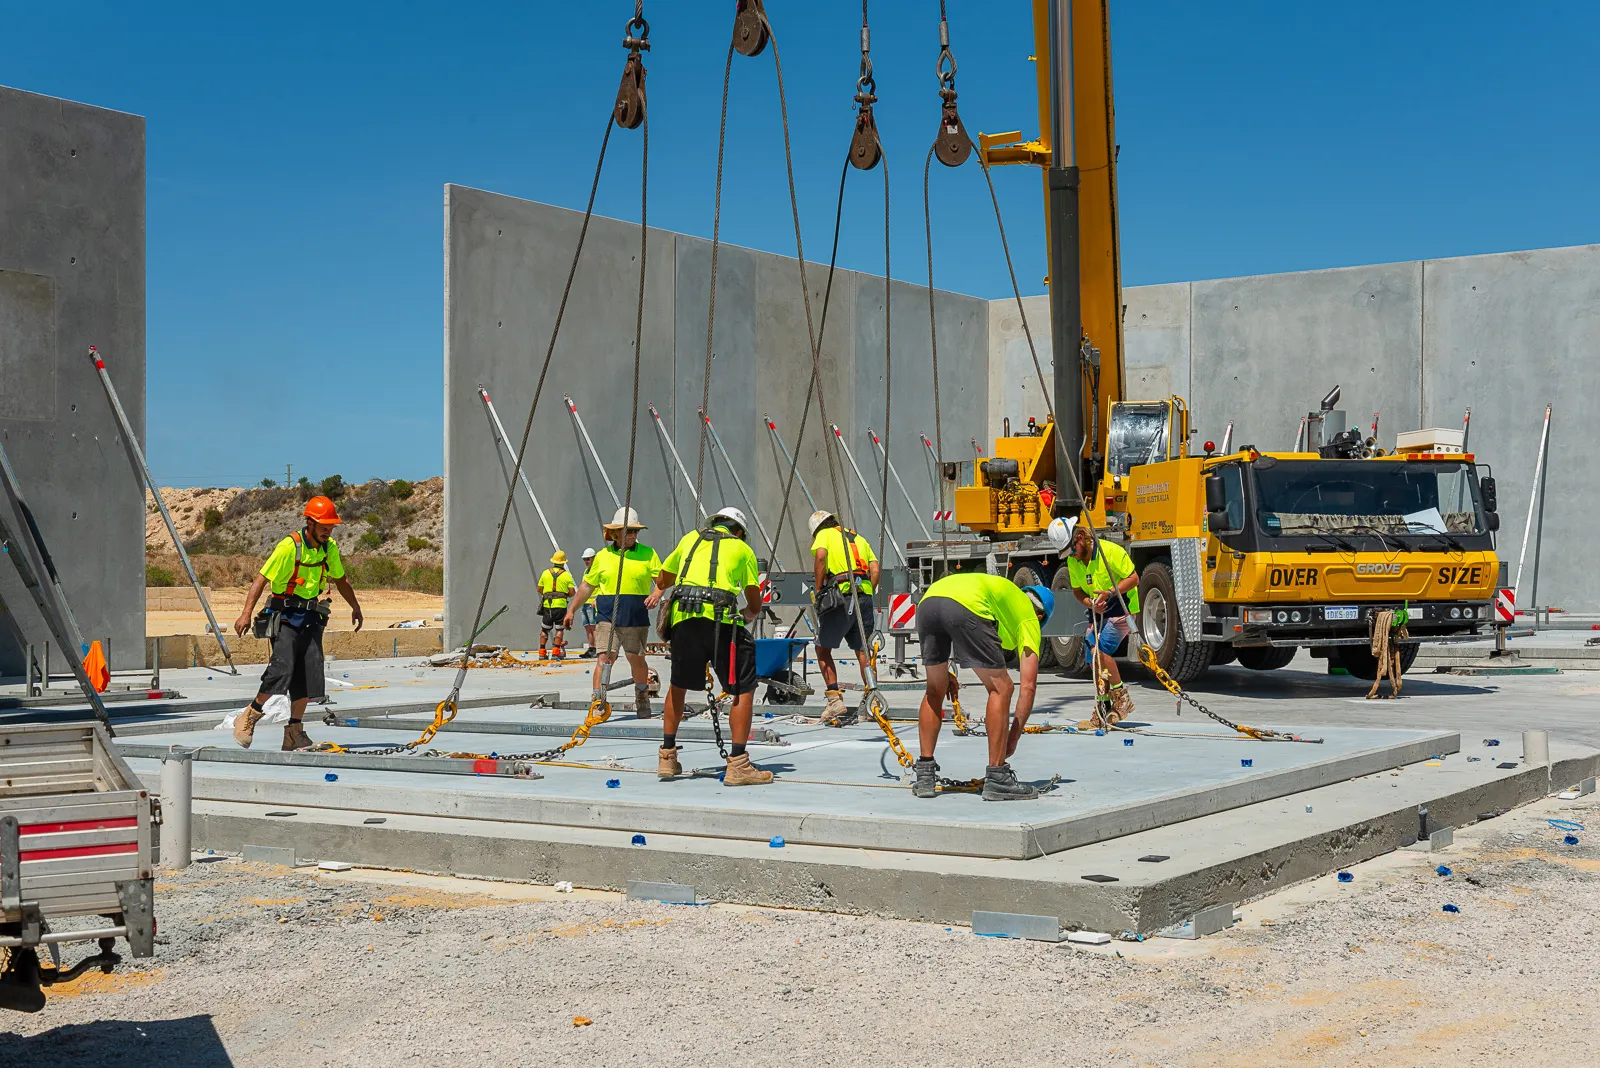 people in safety gear rigging up a concrete panel to be erected by a crane